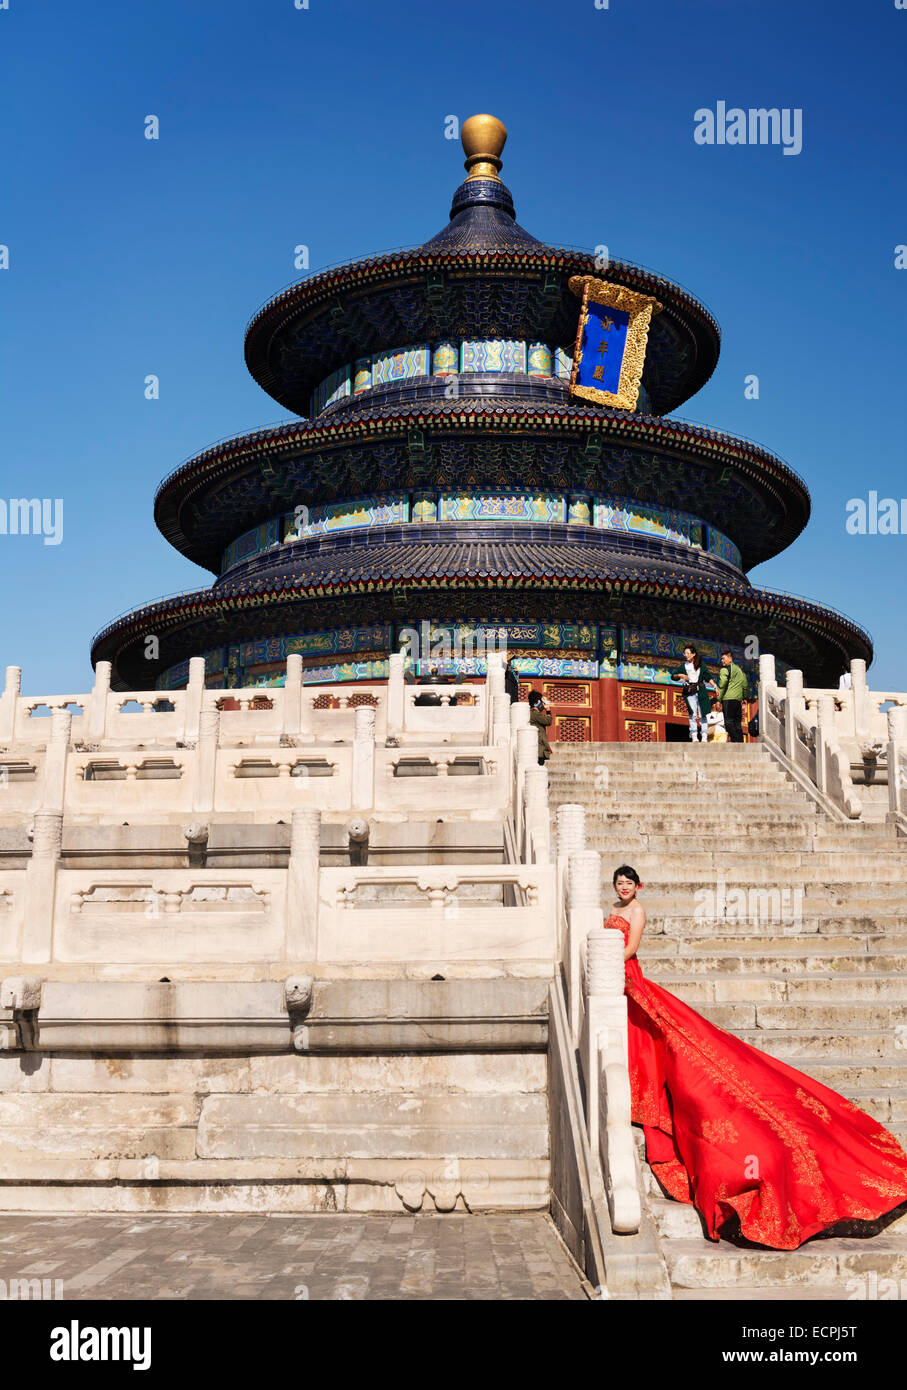 Young bride in red wedding dress in front of The Temple of Heaven, Hall of Prayer in Beijing, China 2014 Stock Photo